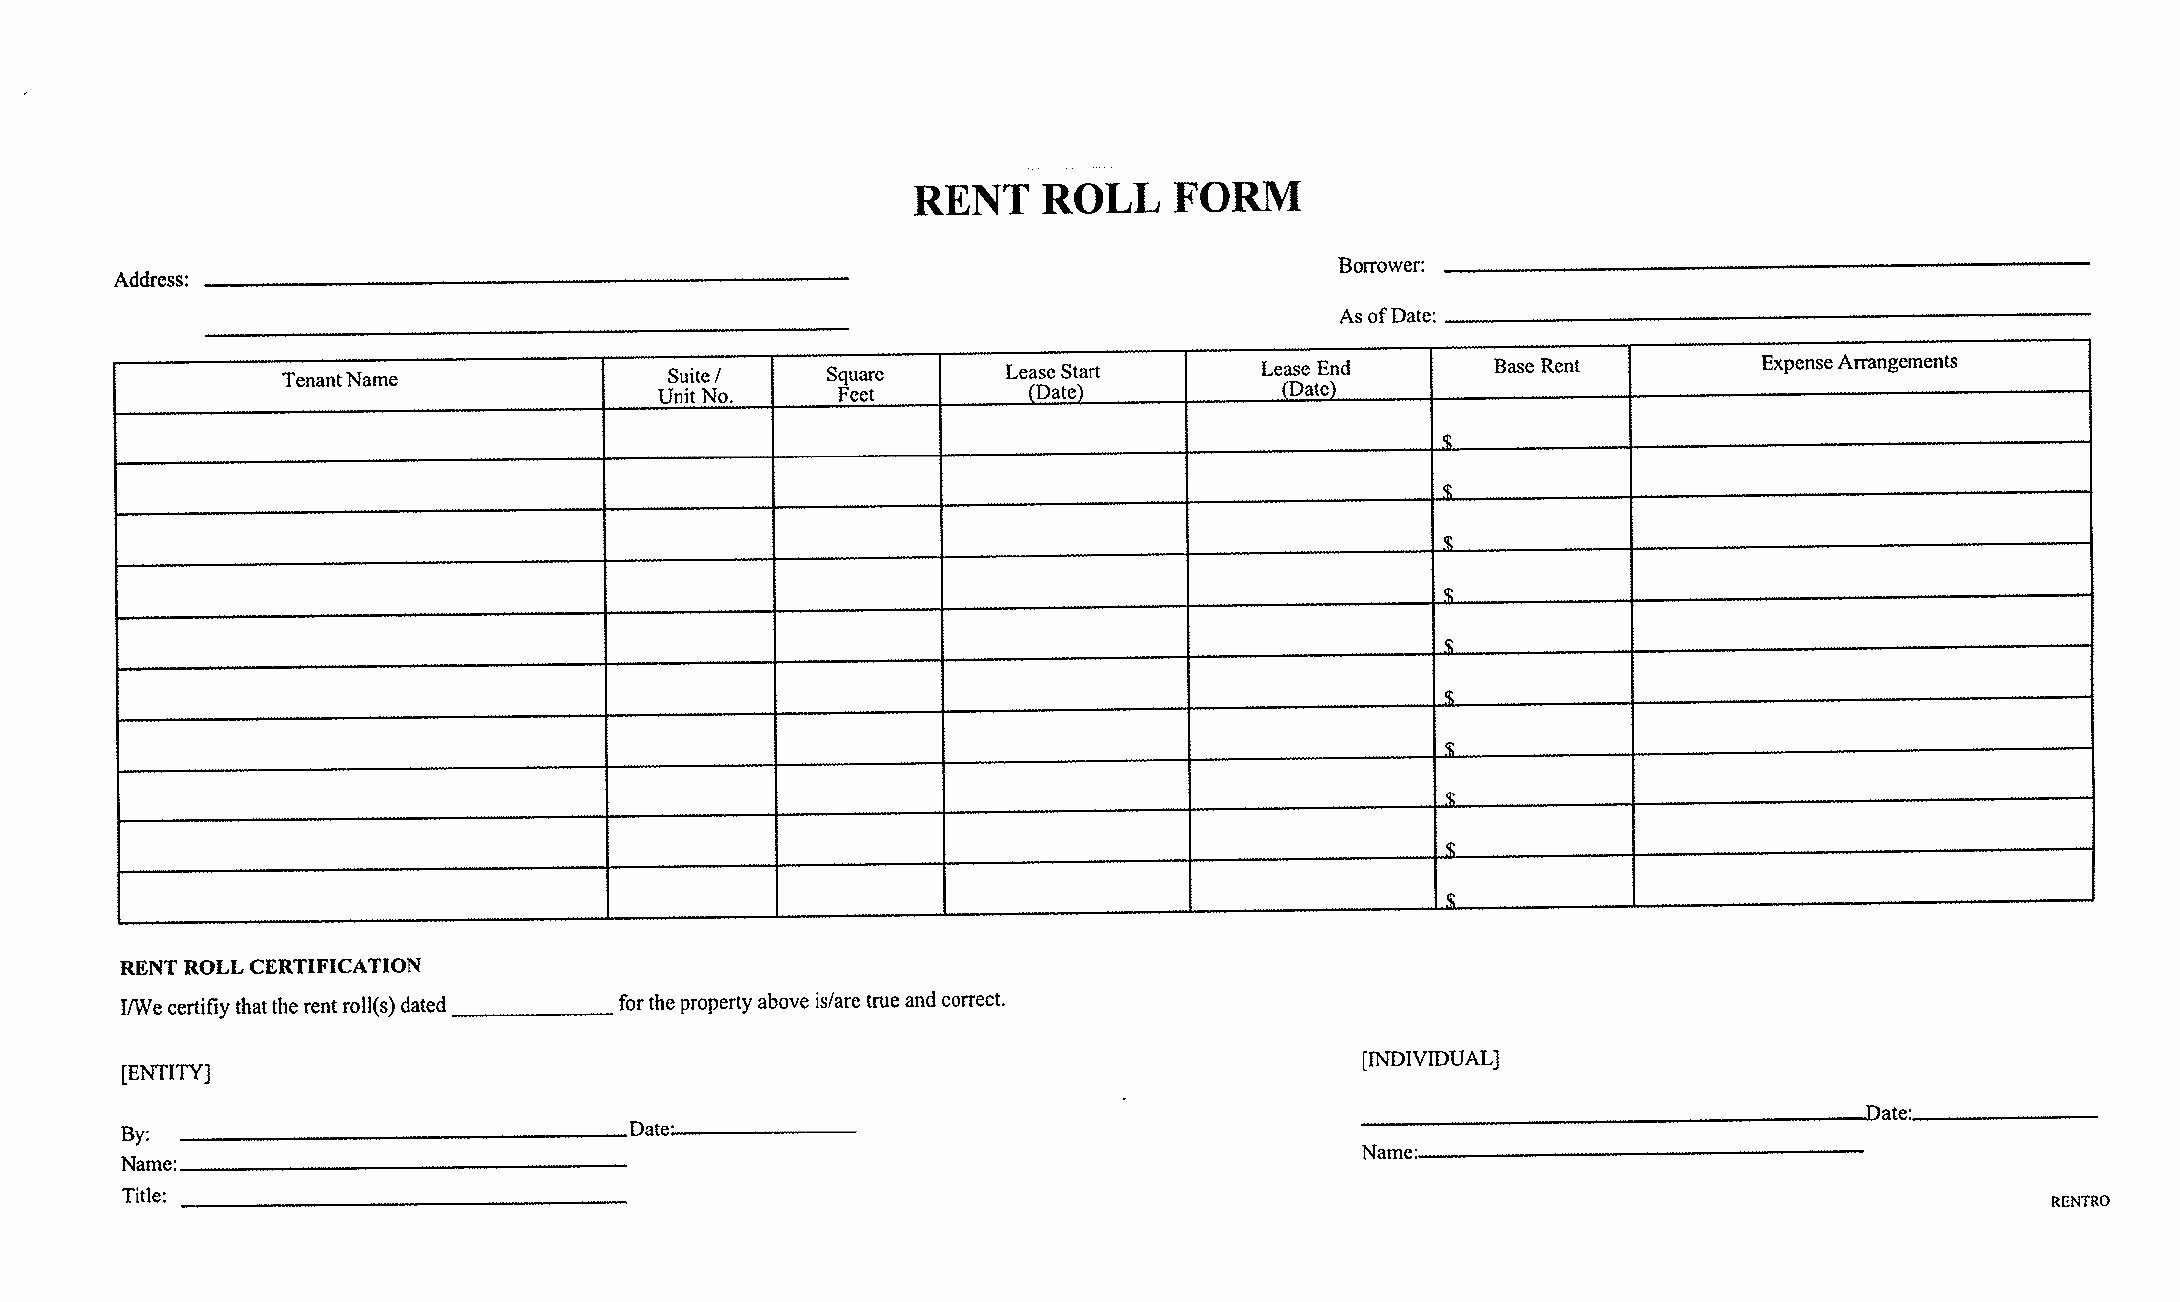 50 New Simple Rent Roll Template DOCUMENTS IDEAS Document